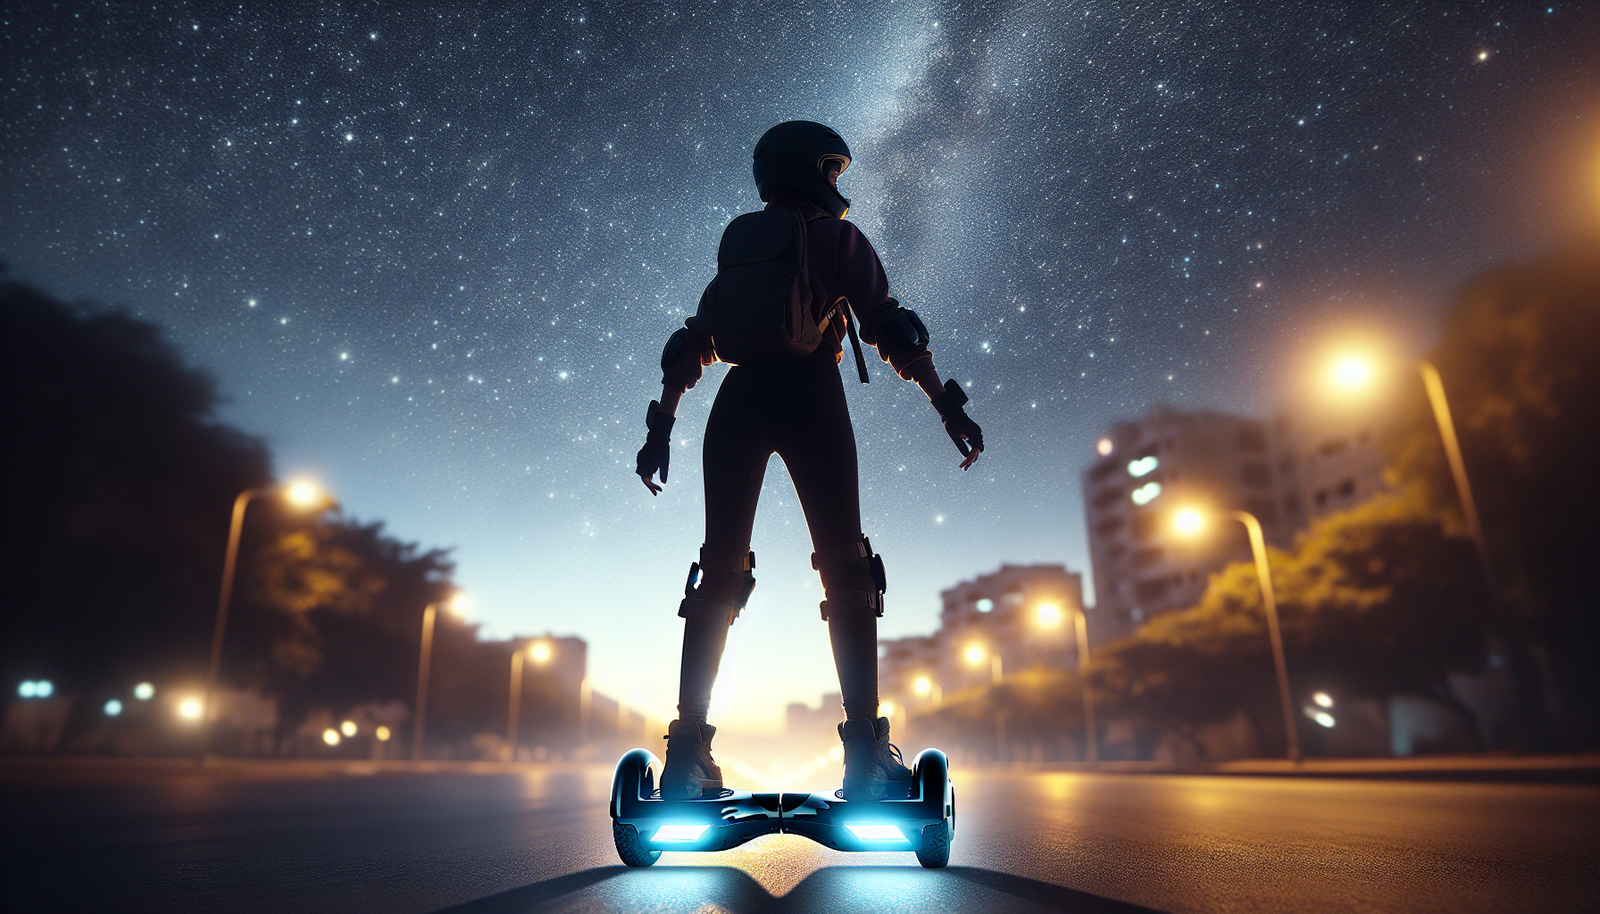 Are There Specific Rules For Riding A Hoverboard At Night?